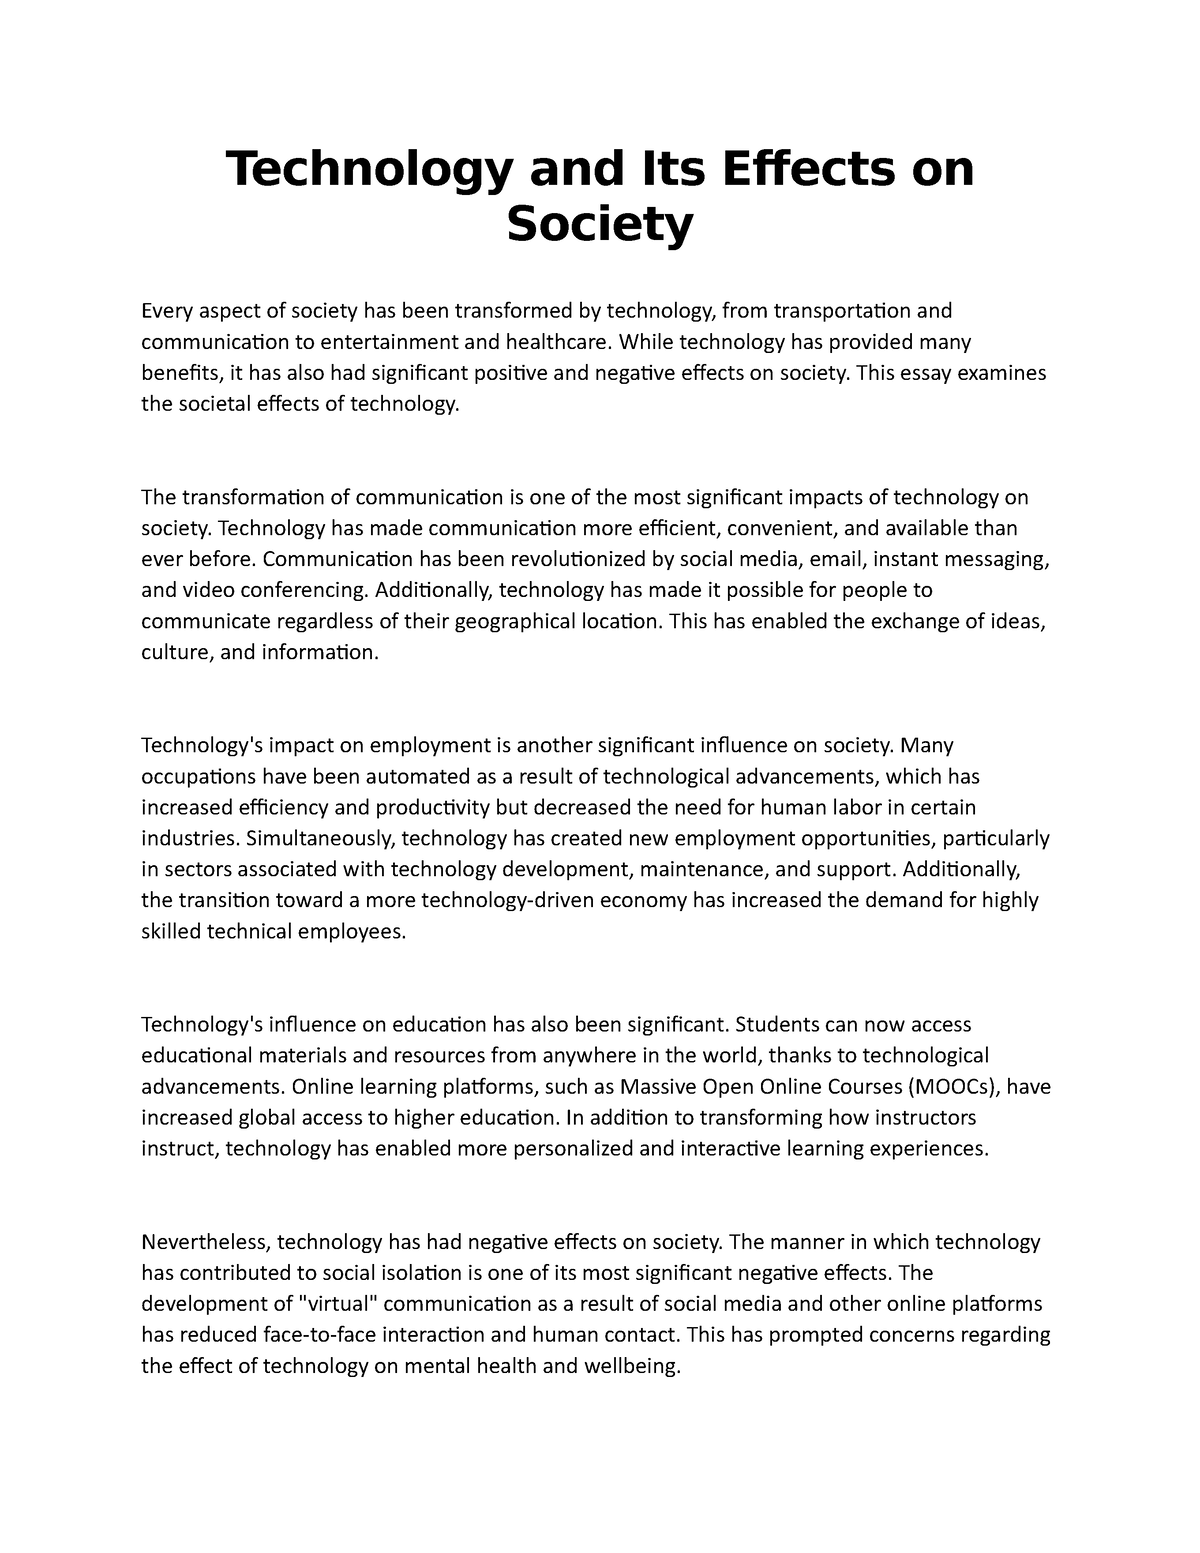 social media and its effects on society essay